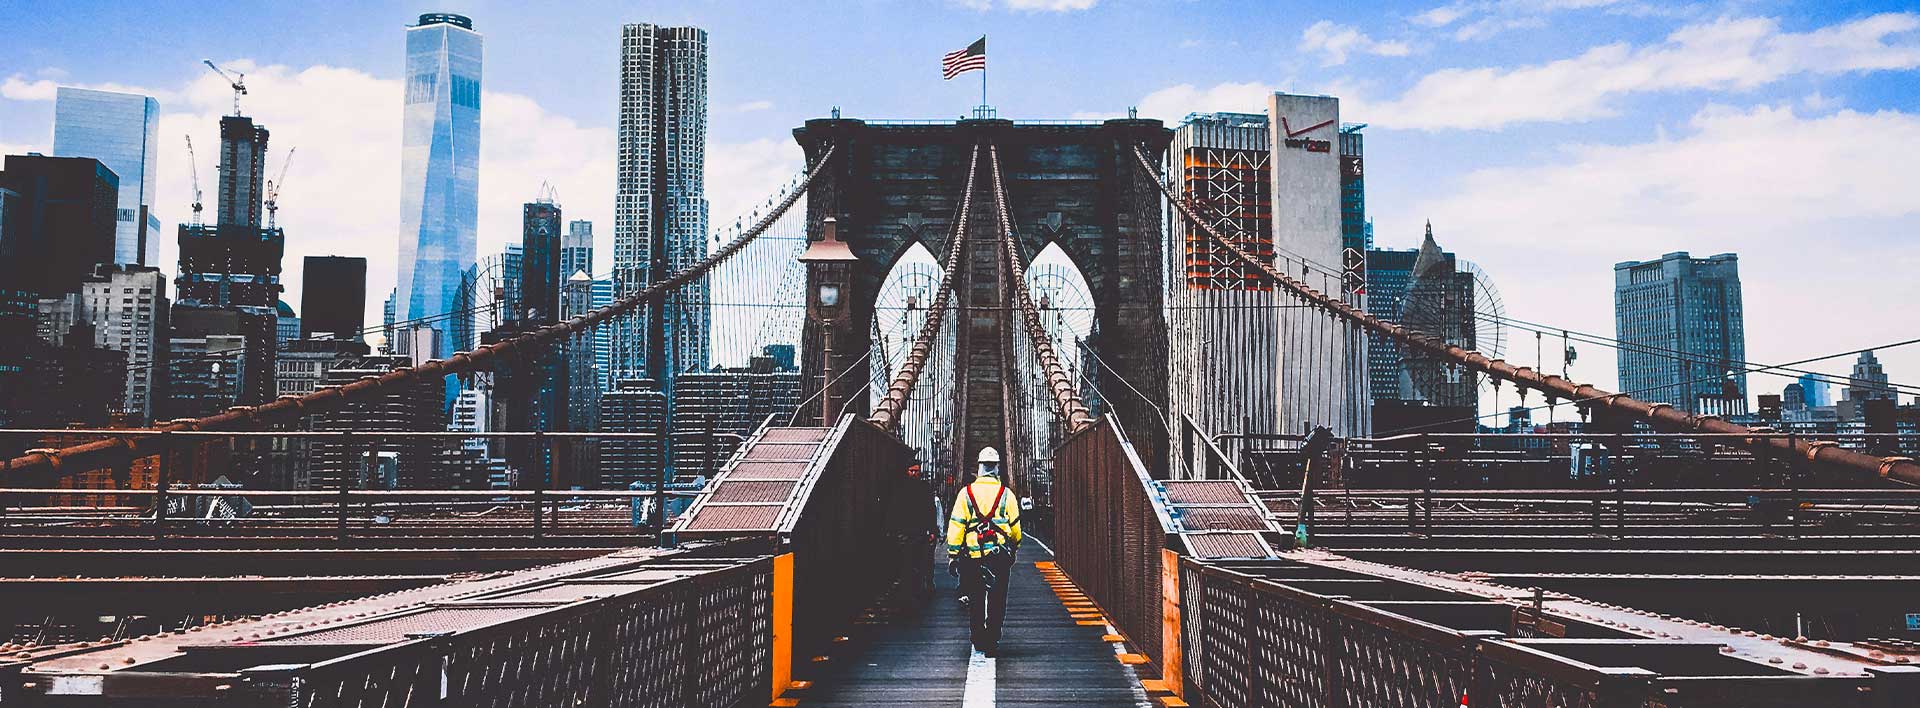 Labor studies department main image, show worker walking on a bridge with New York city in the background.